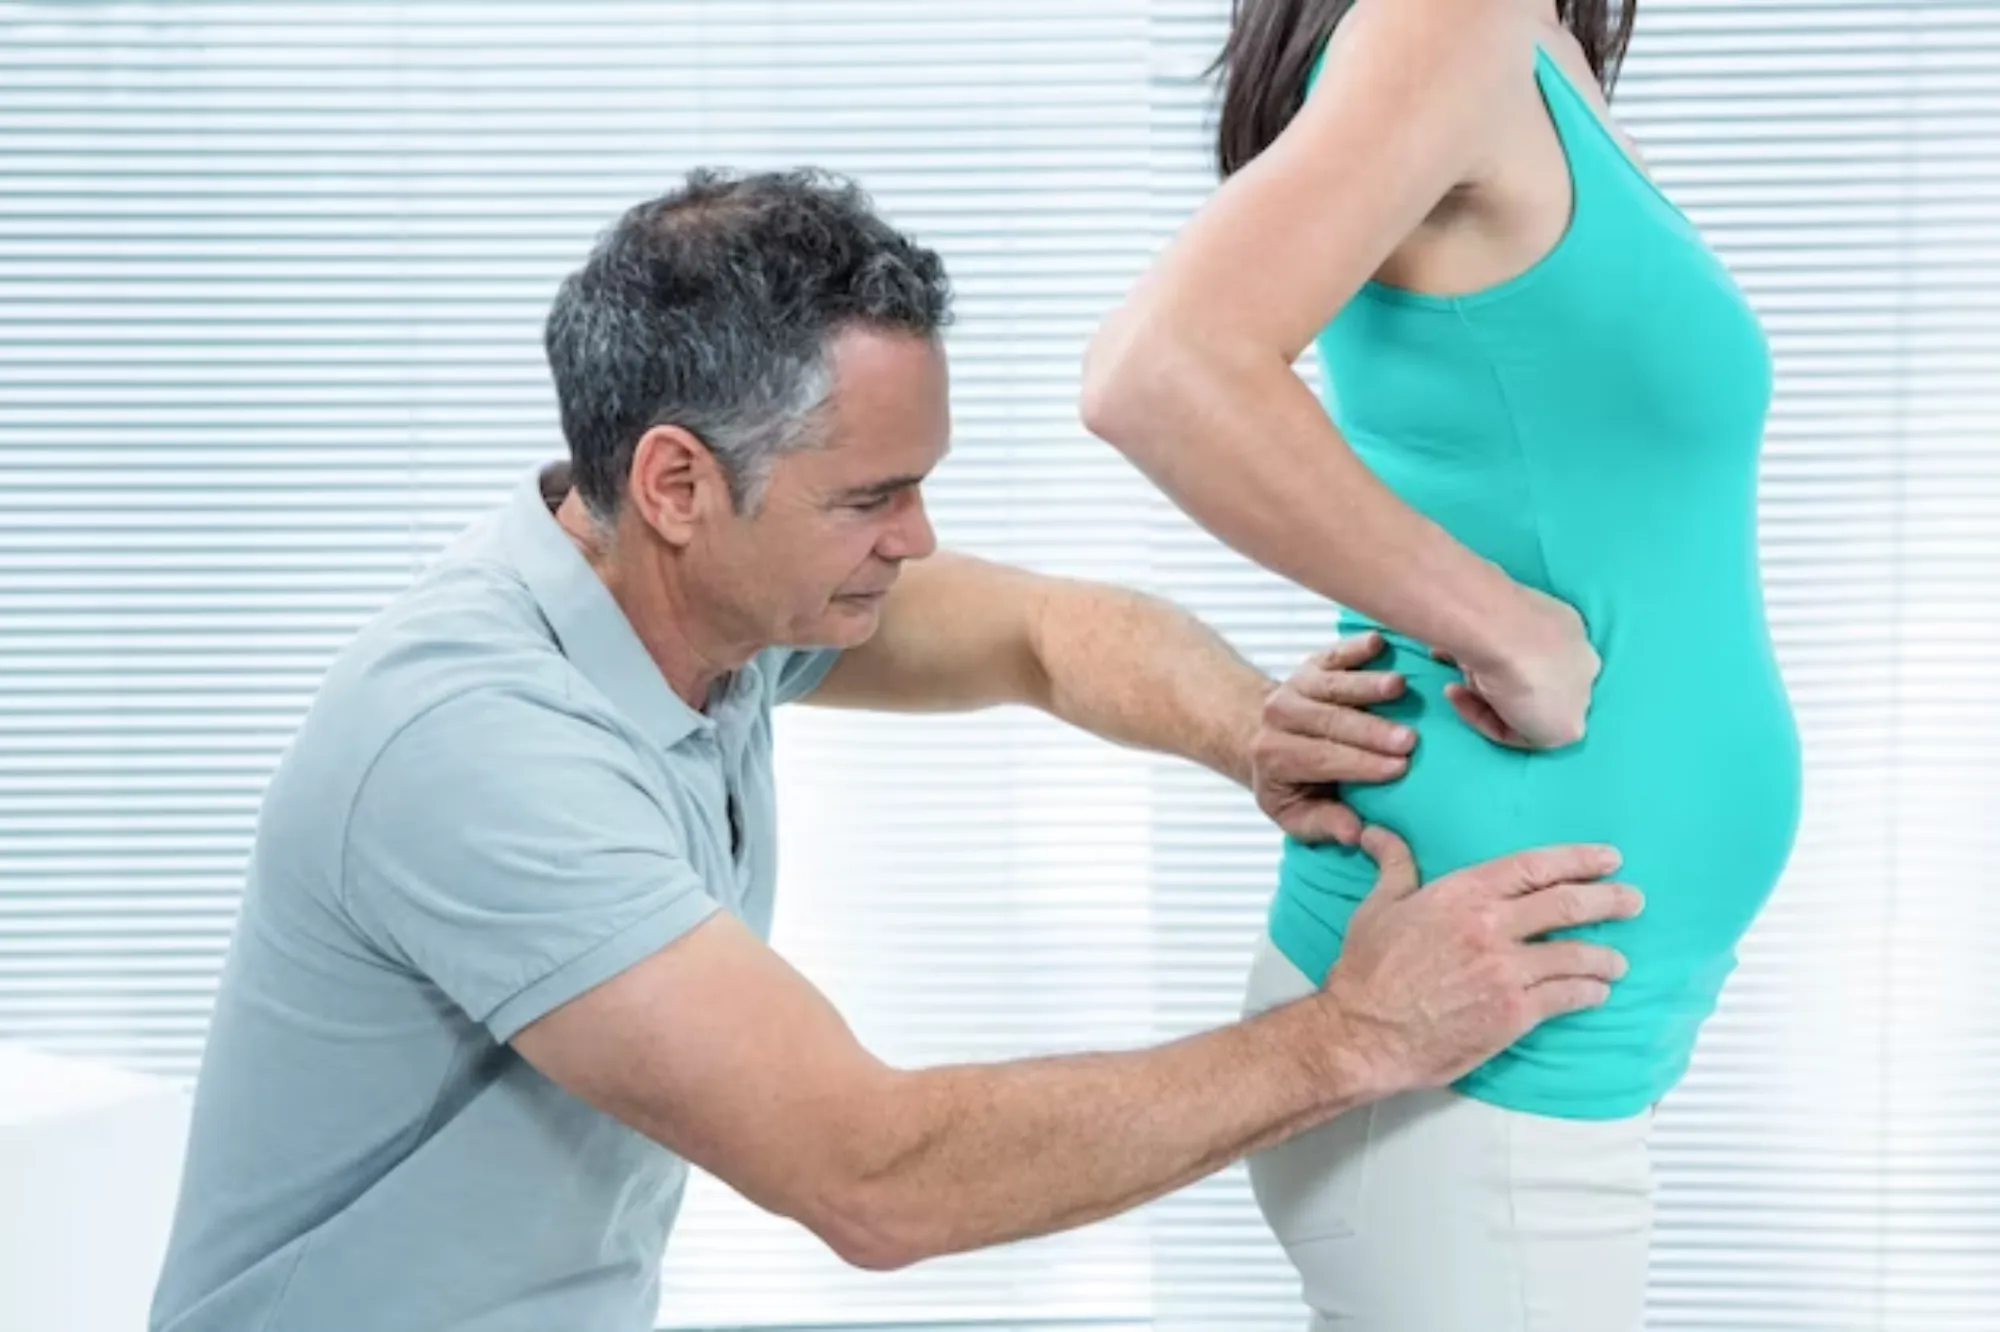 Is Chiropractic Care Safe During Pregnancy